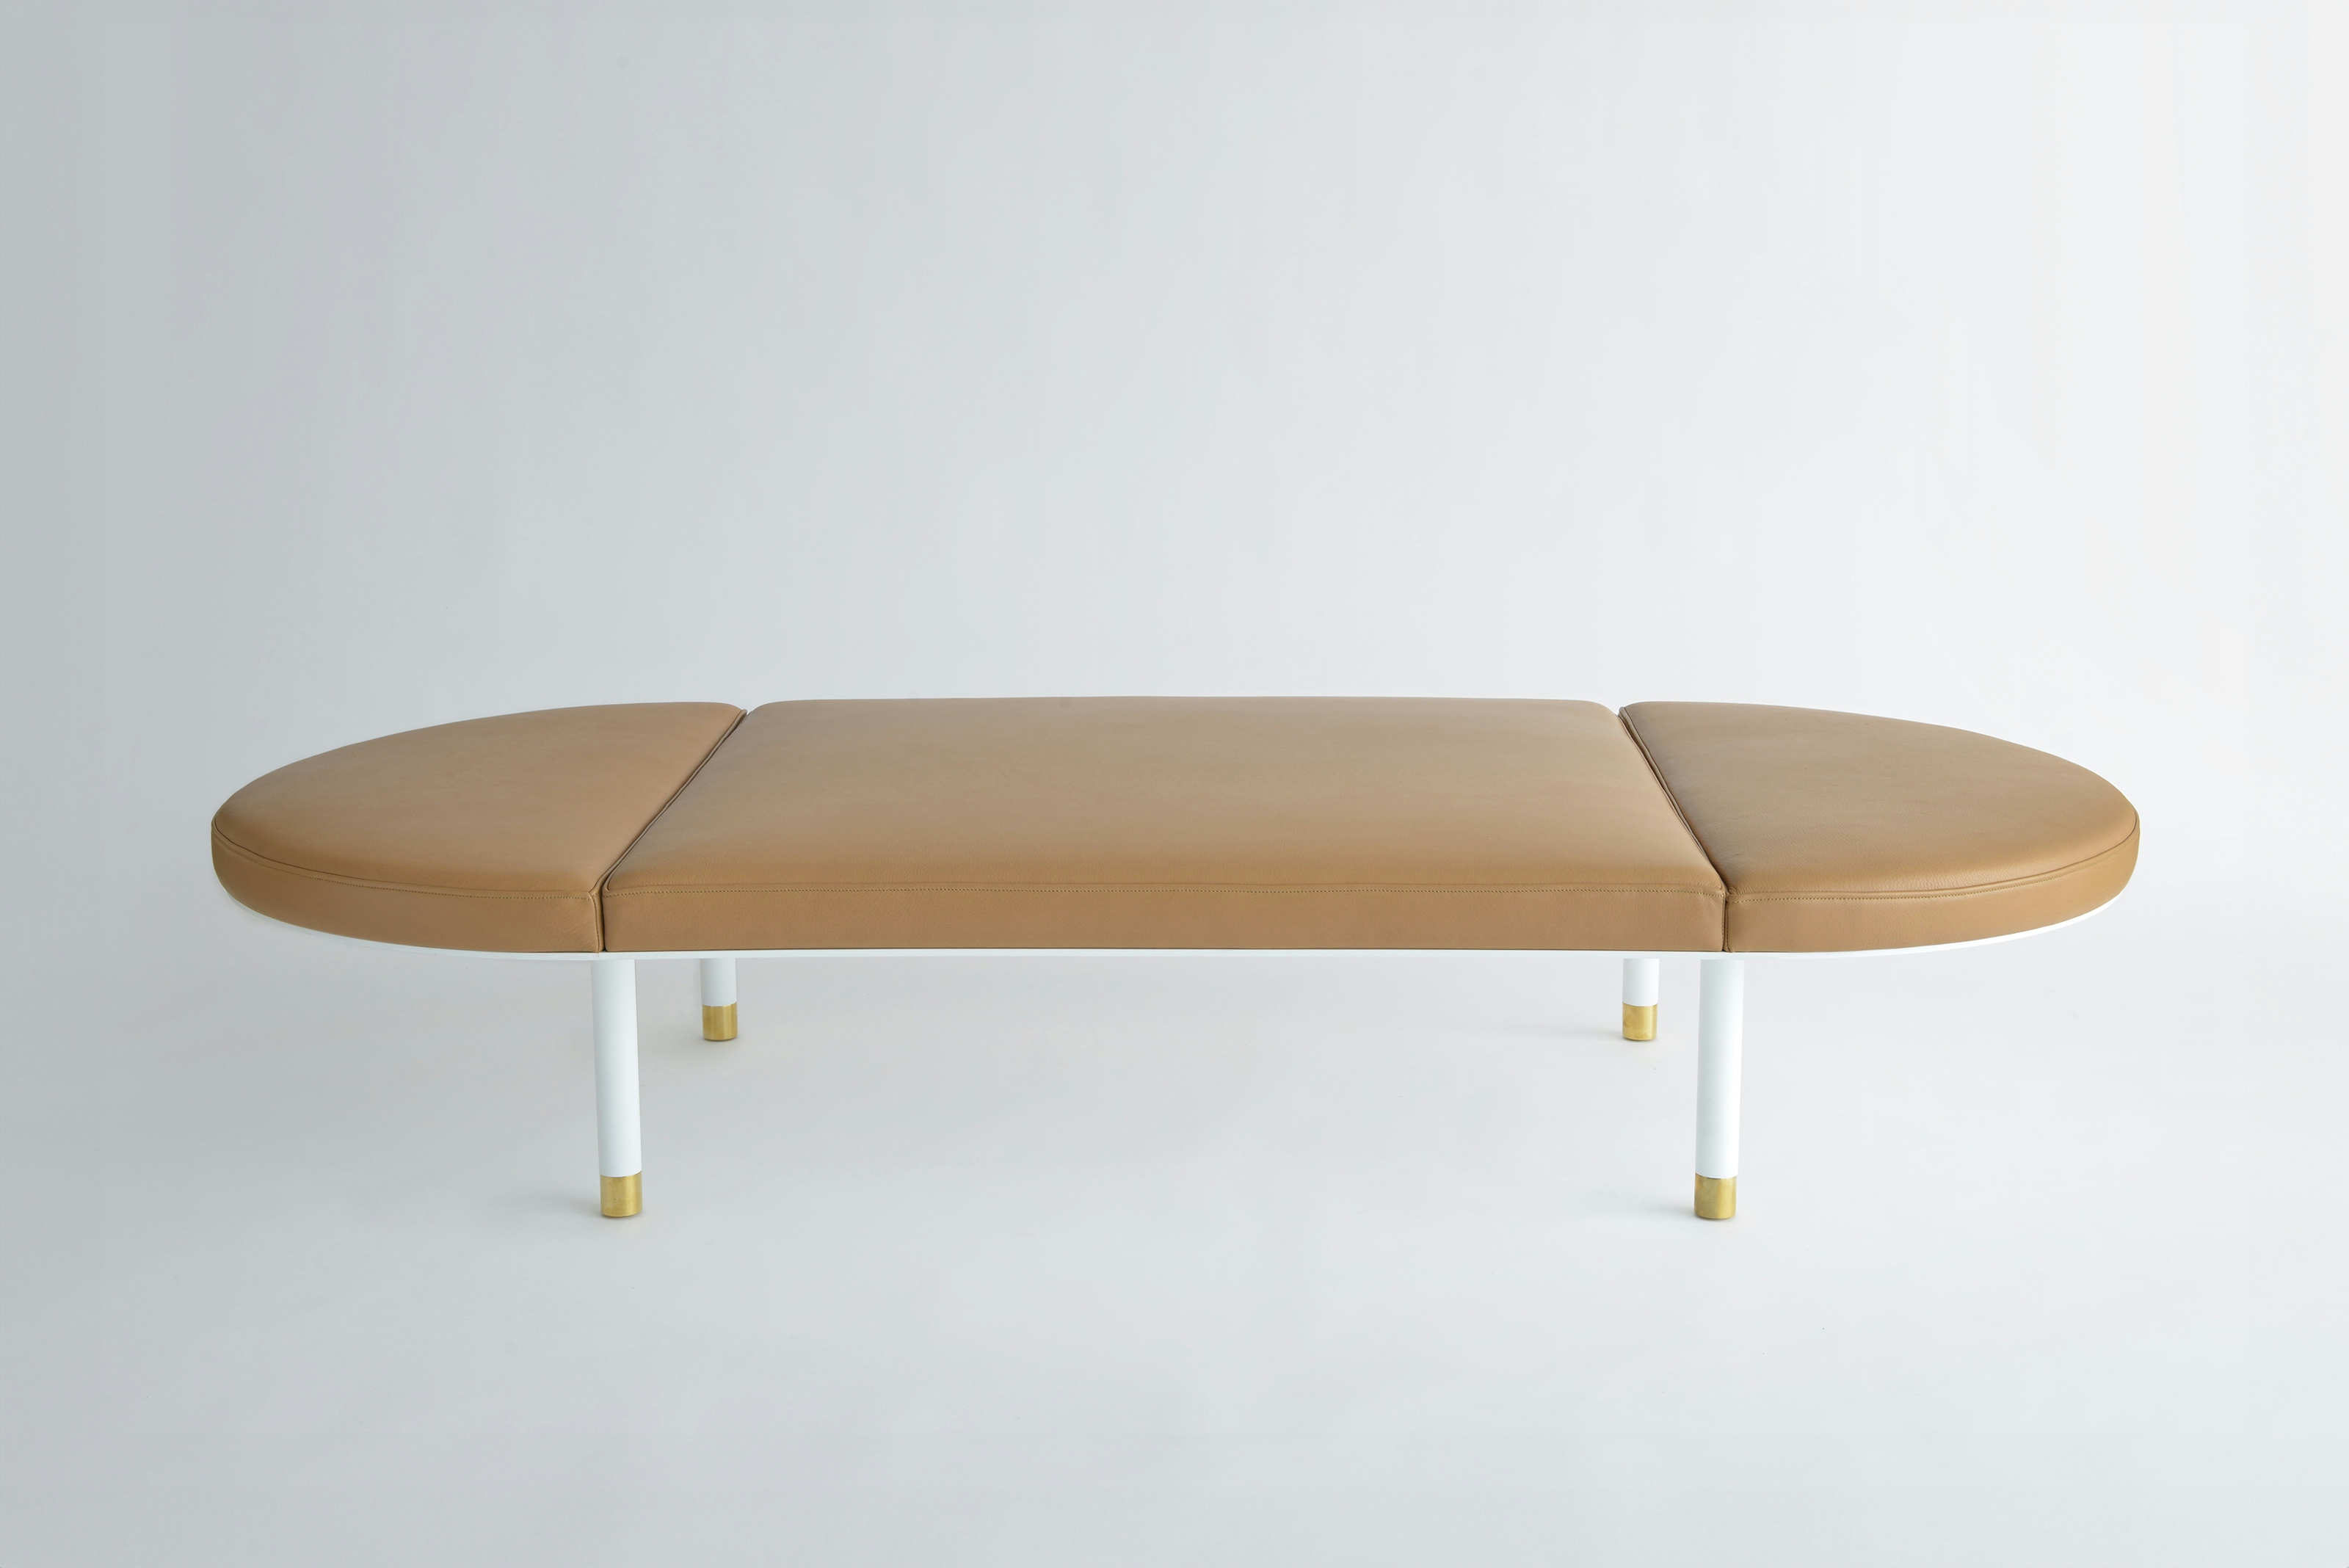 Phase Design Pill Daybed 1 Product Page